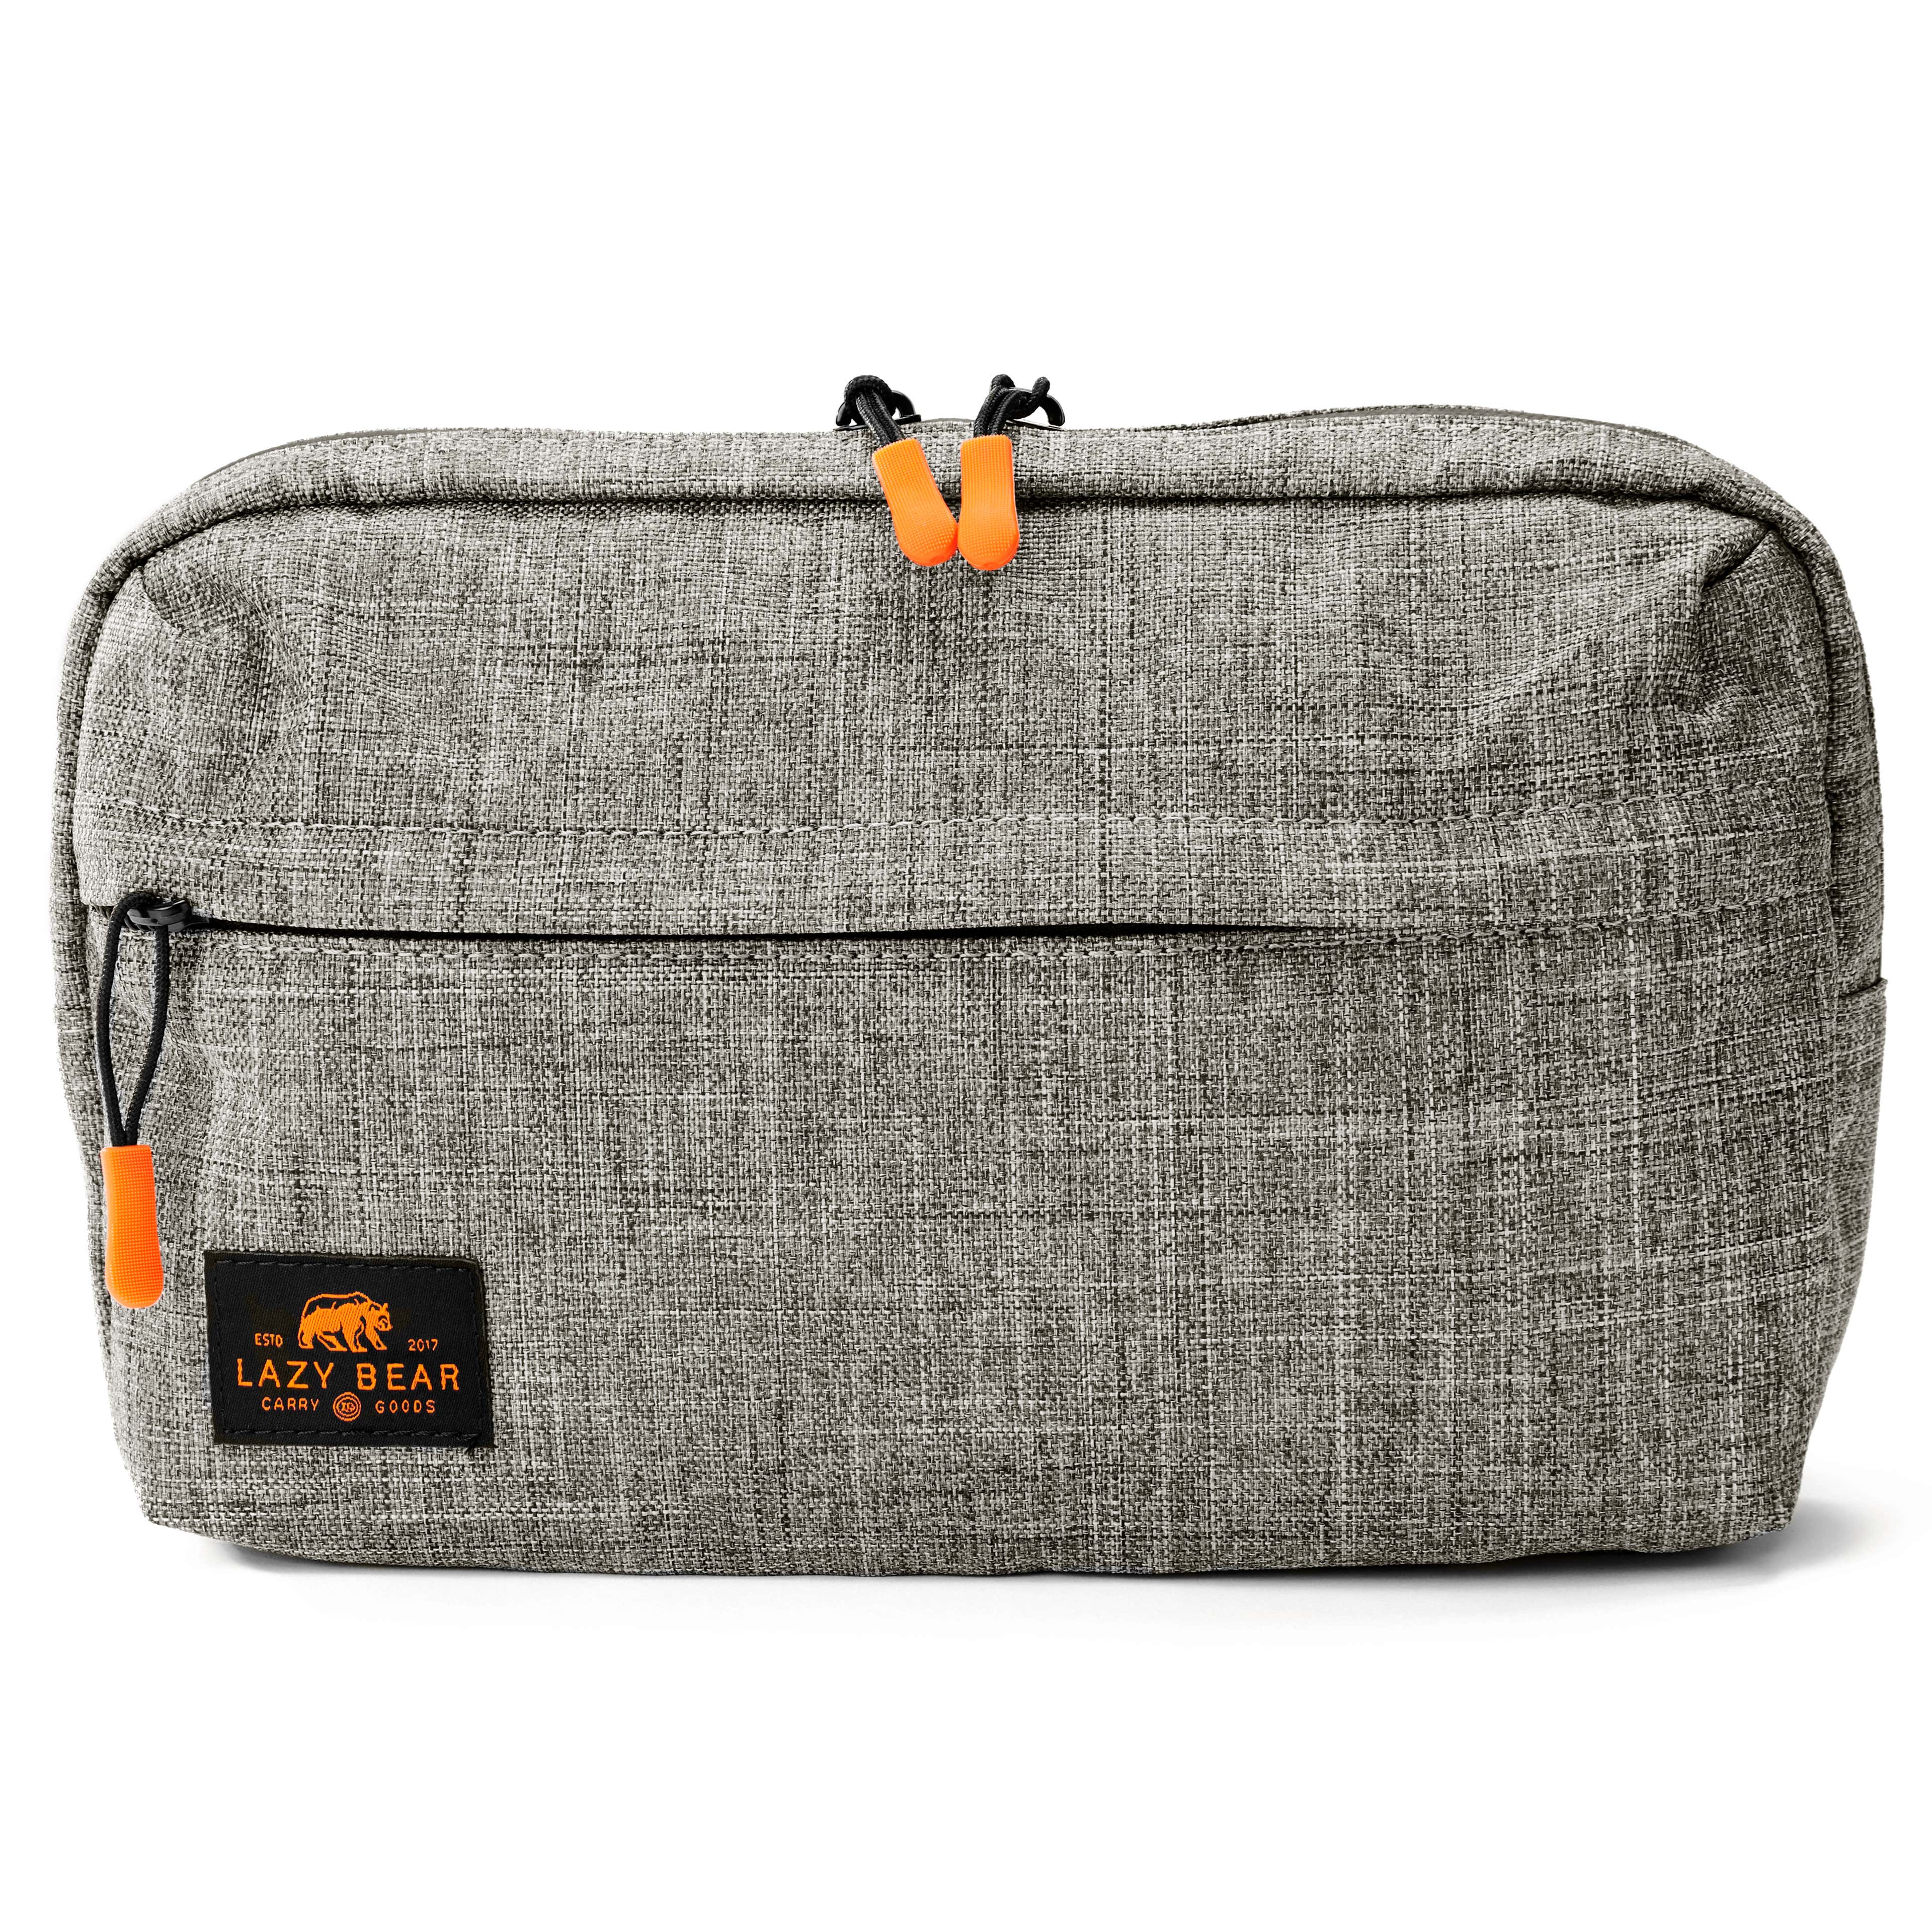 Lawson Grey Foldable Bum Bag – Recycled PET - 8 - gallery